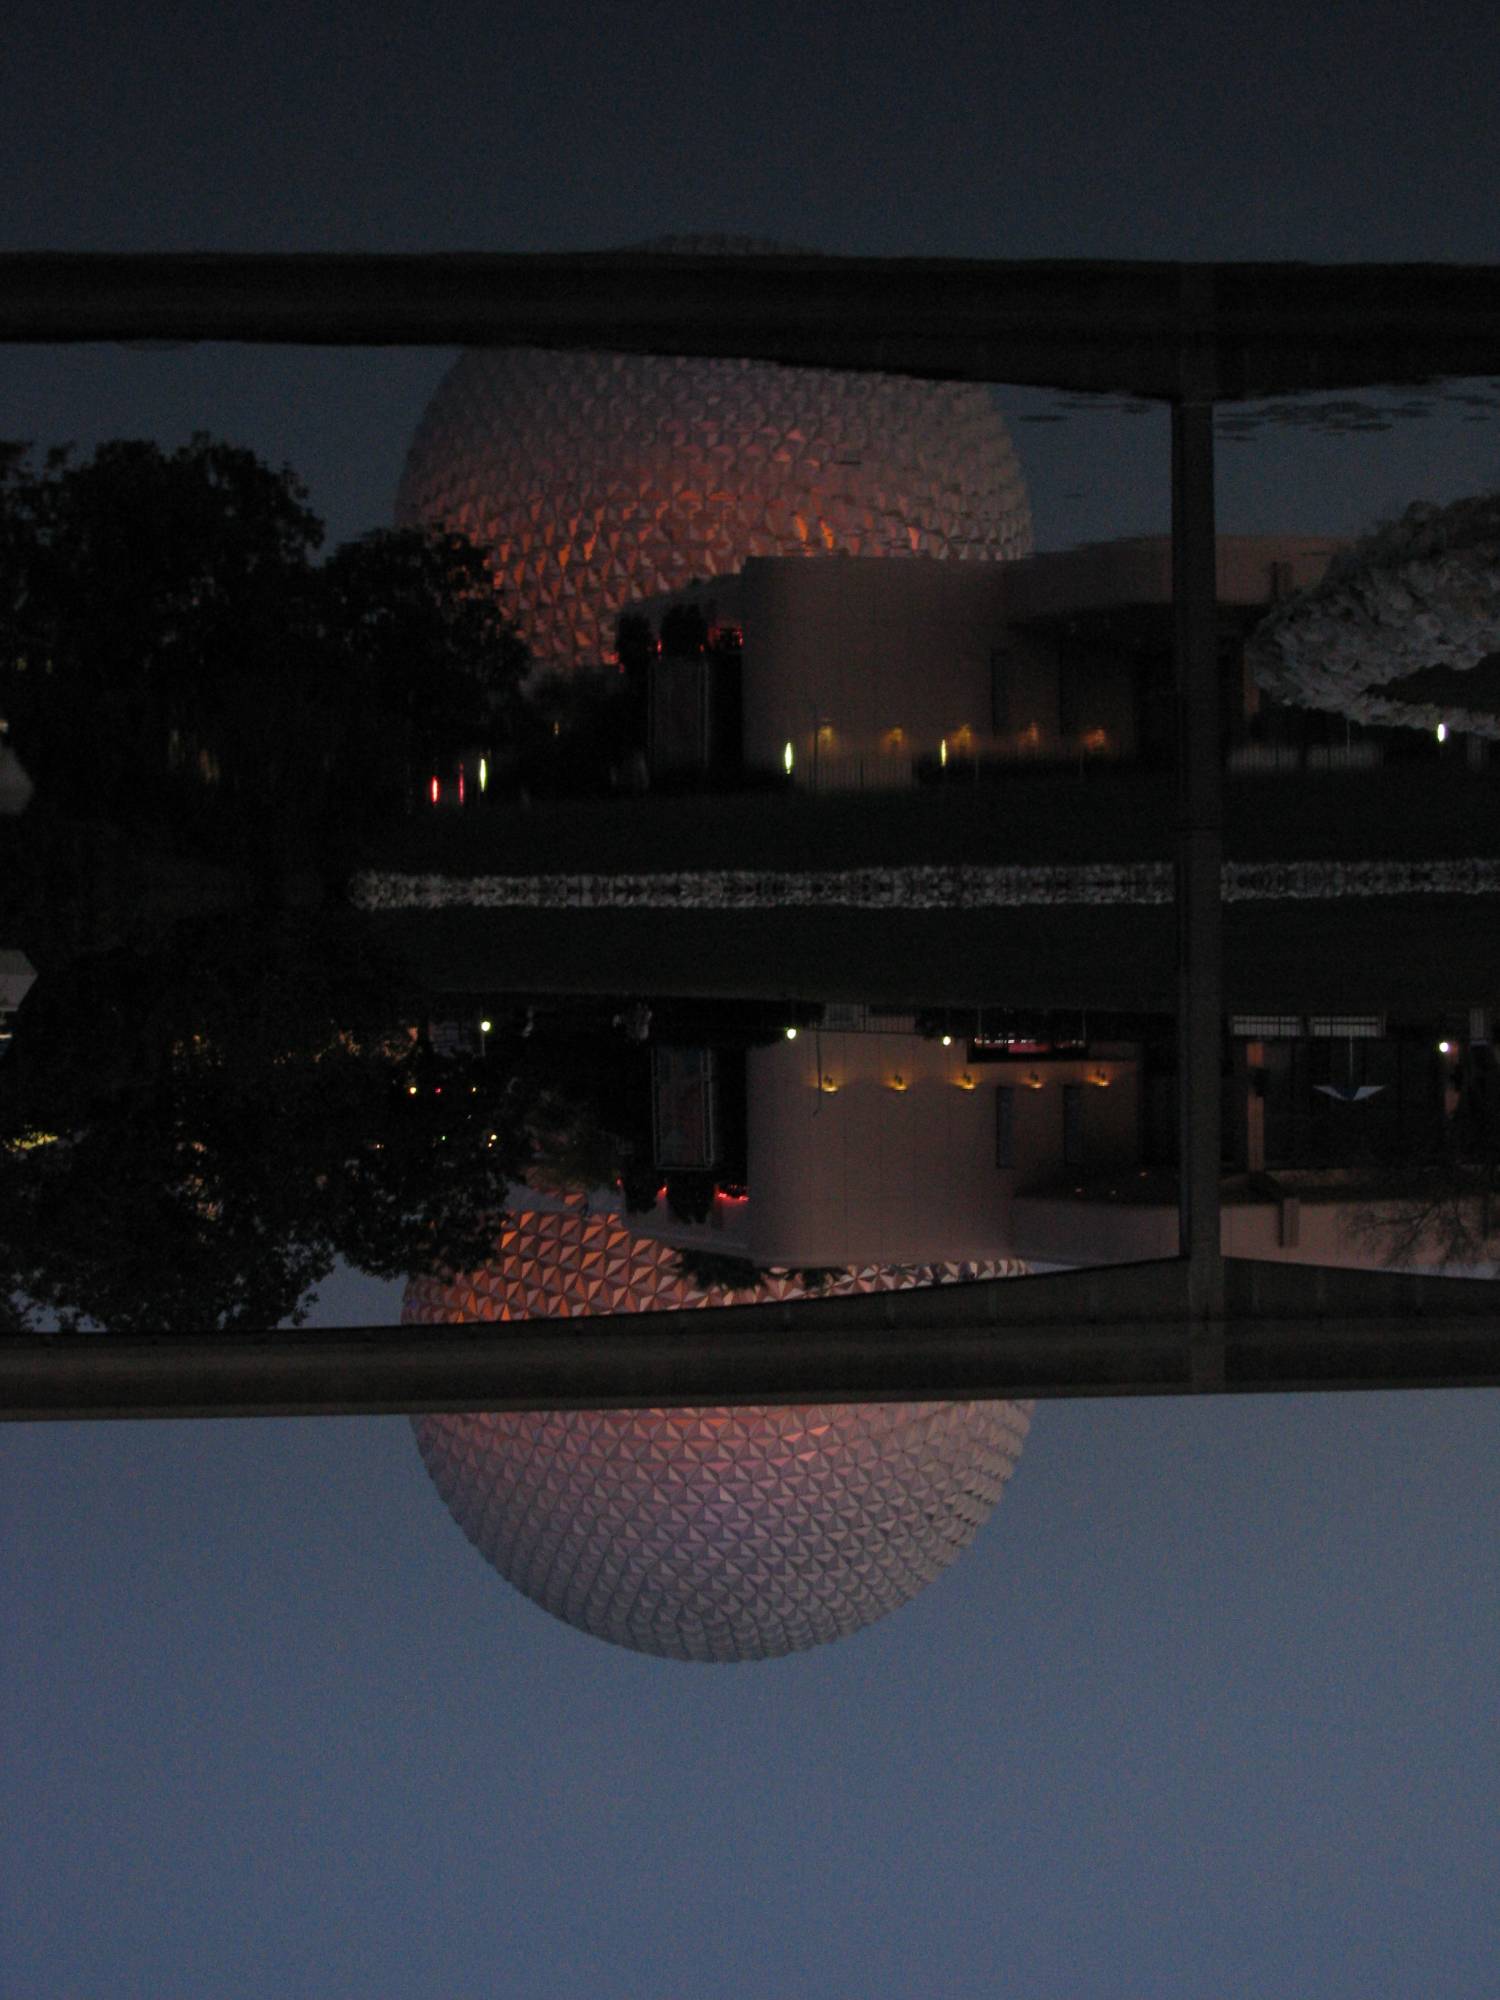 Reflection of the monorail and geodesic sphere at Epcot